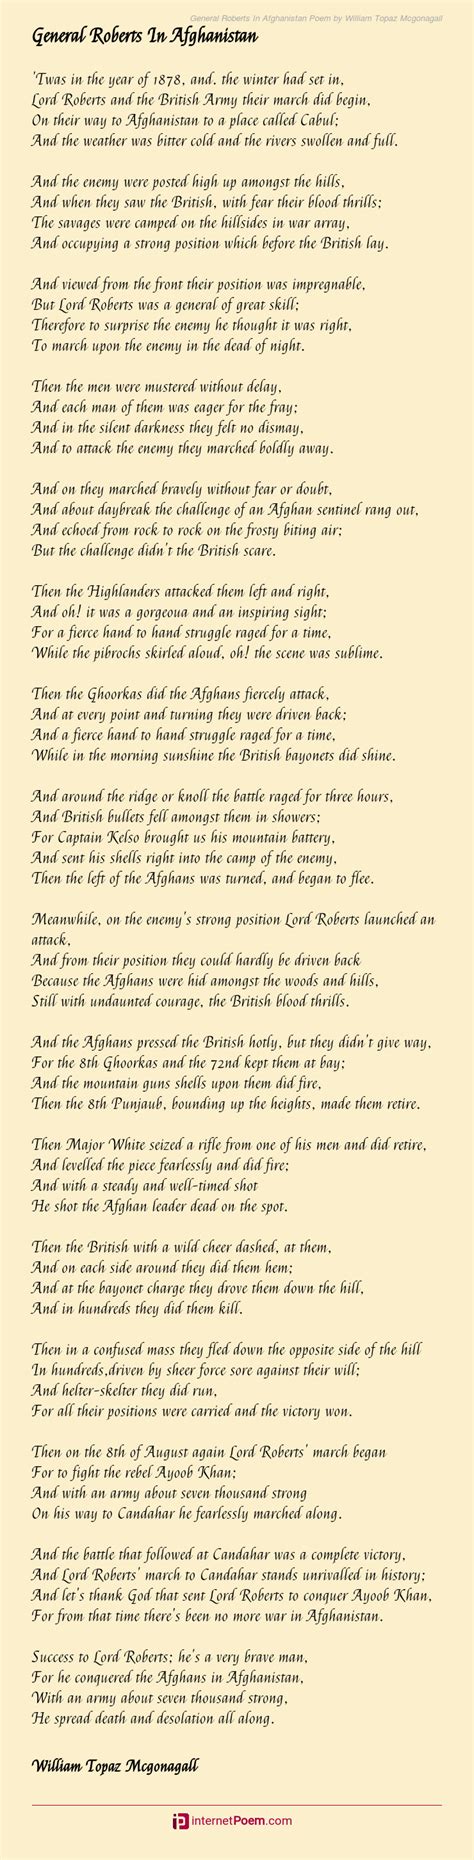 General Roberts In Afghanistan Poem By William Topaz Mcgonagall